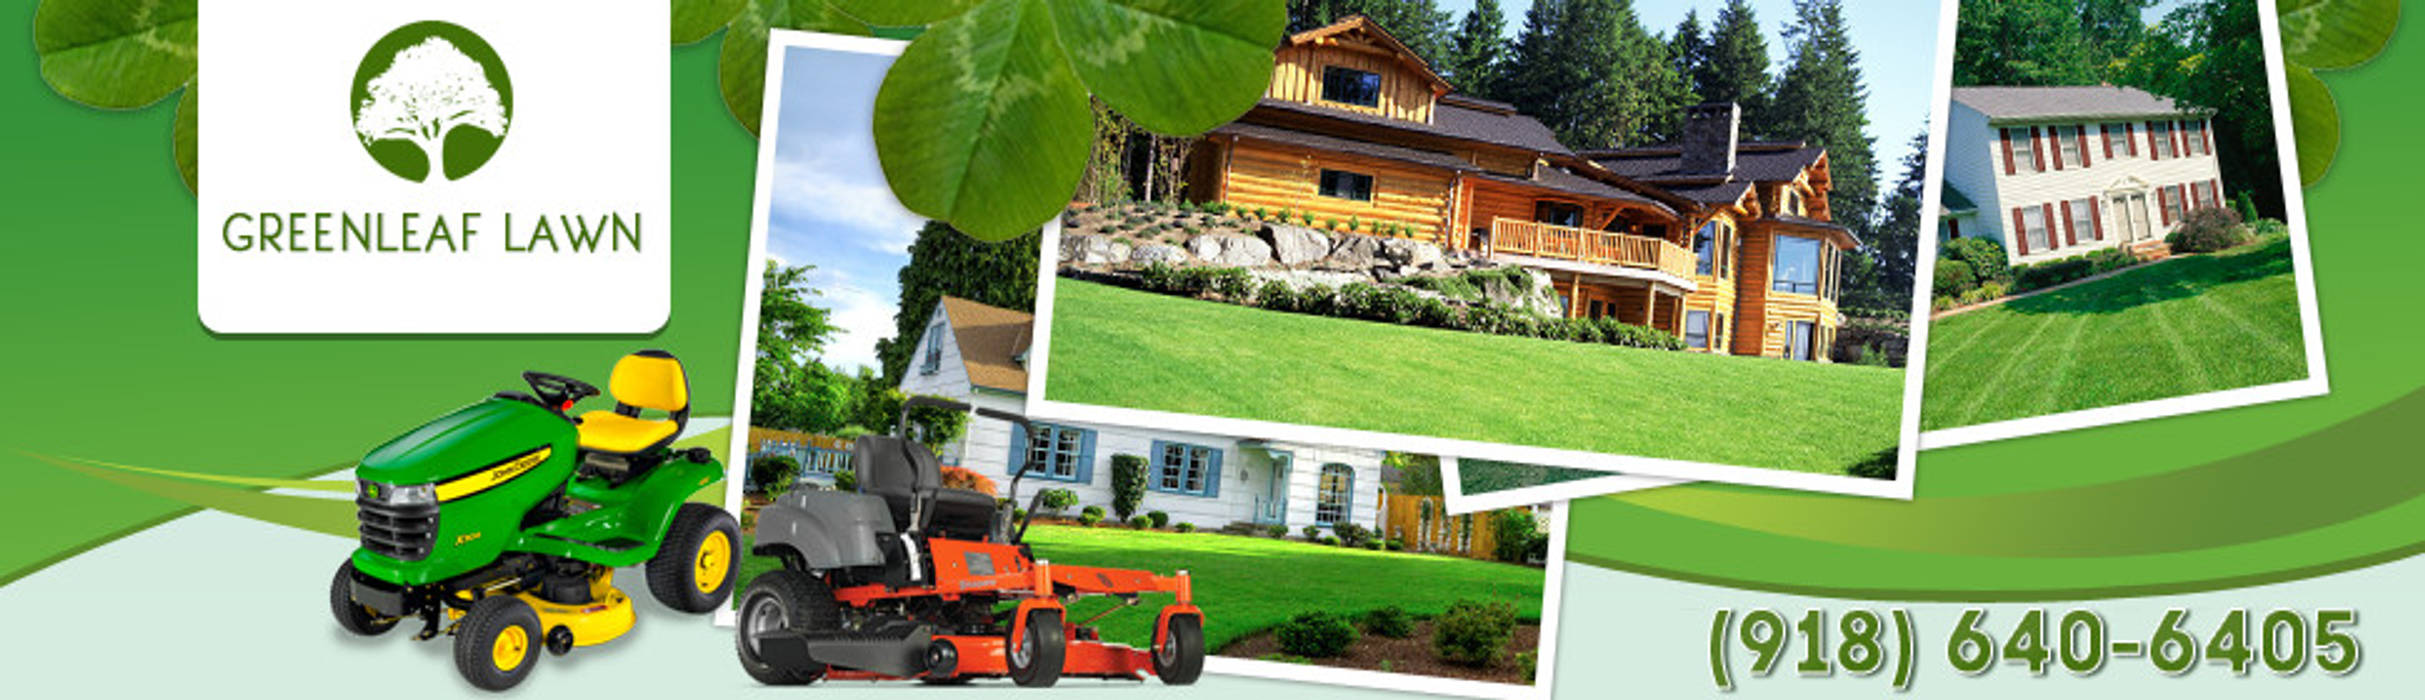 Main Reasons To Get Professional Lawn Care Services, Real Estate Real Estate Casas clássicas